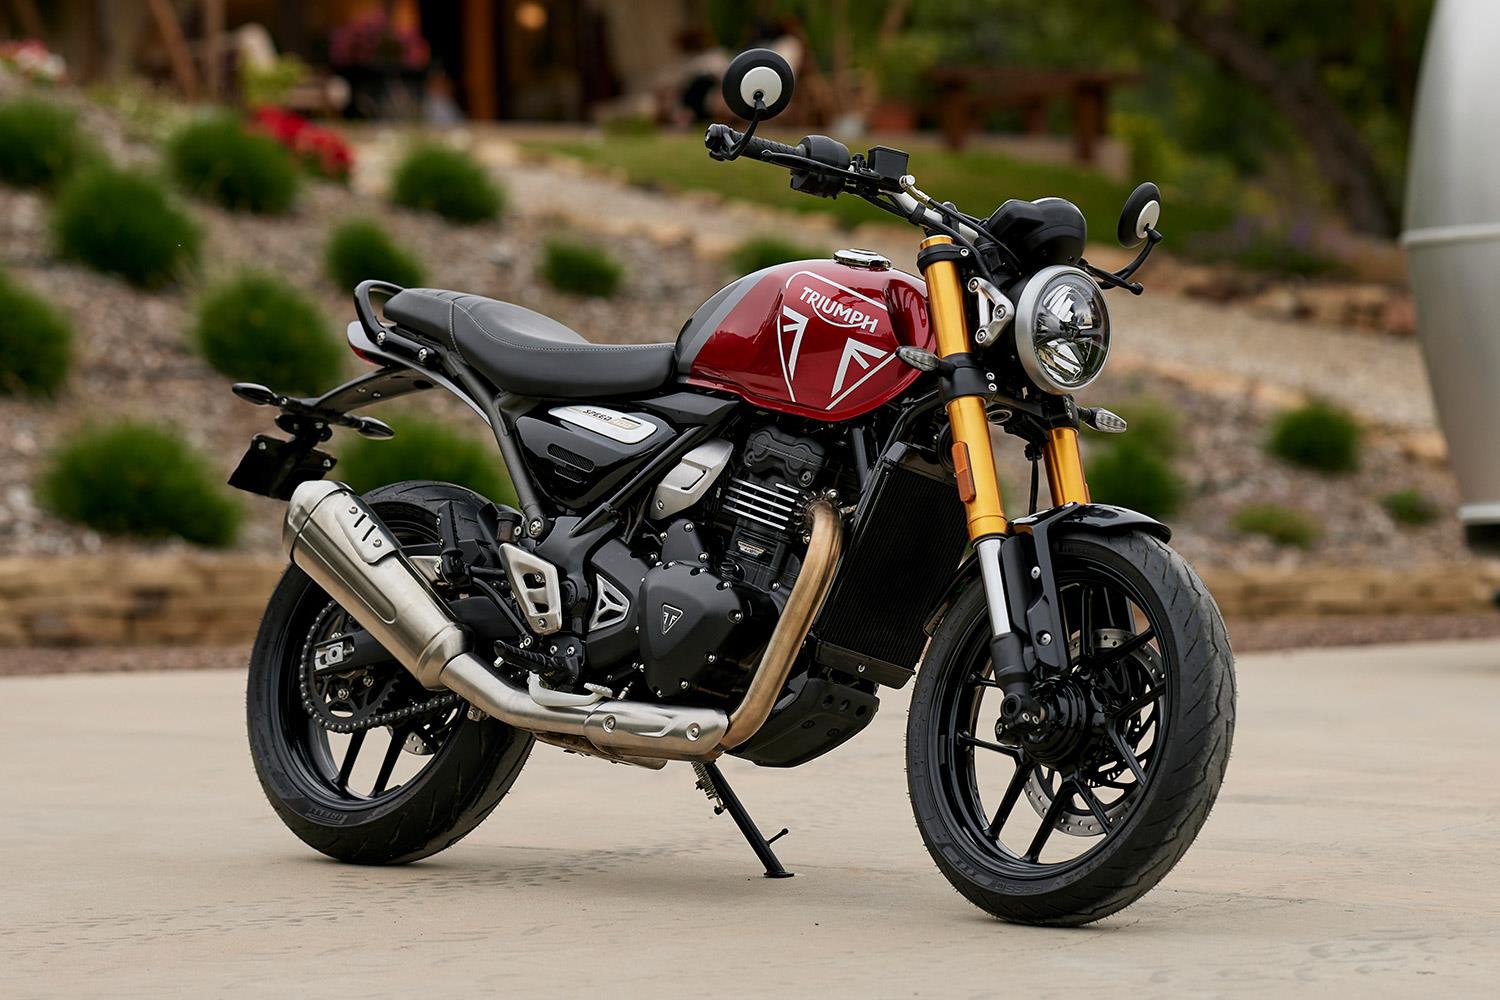 All-new Triumph Speed 400 and Scrambler 400 X singles revealed